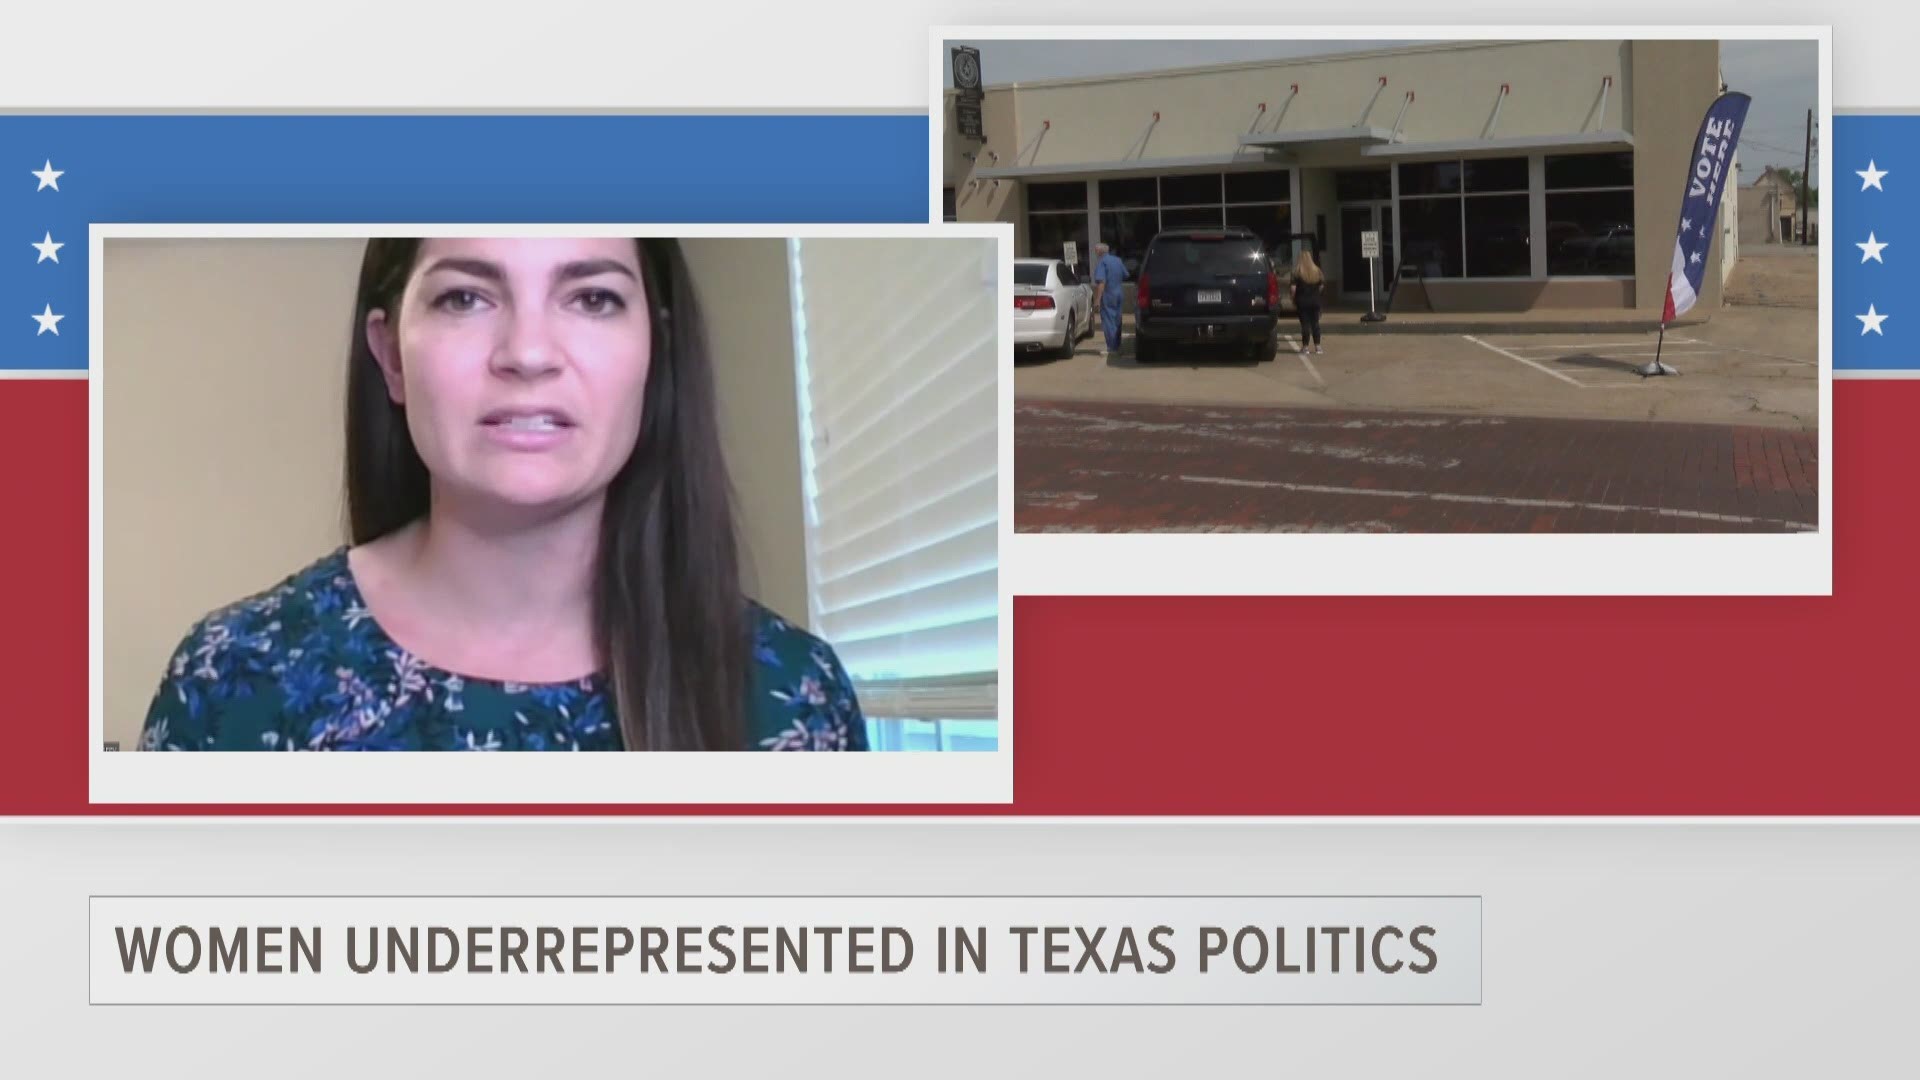 Adrianna Maberry explains how the Lone Star Parity Project uses research to try to increase the number of women at all levels of politics in Texas